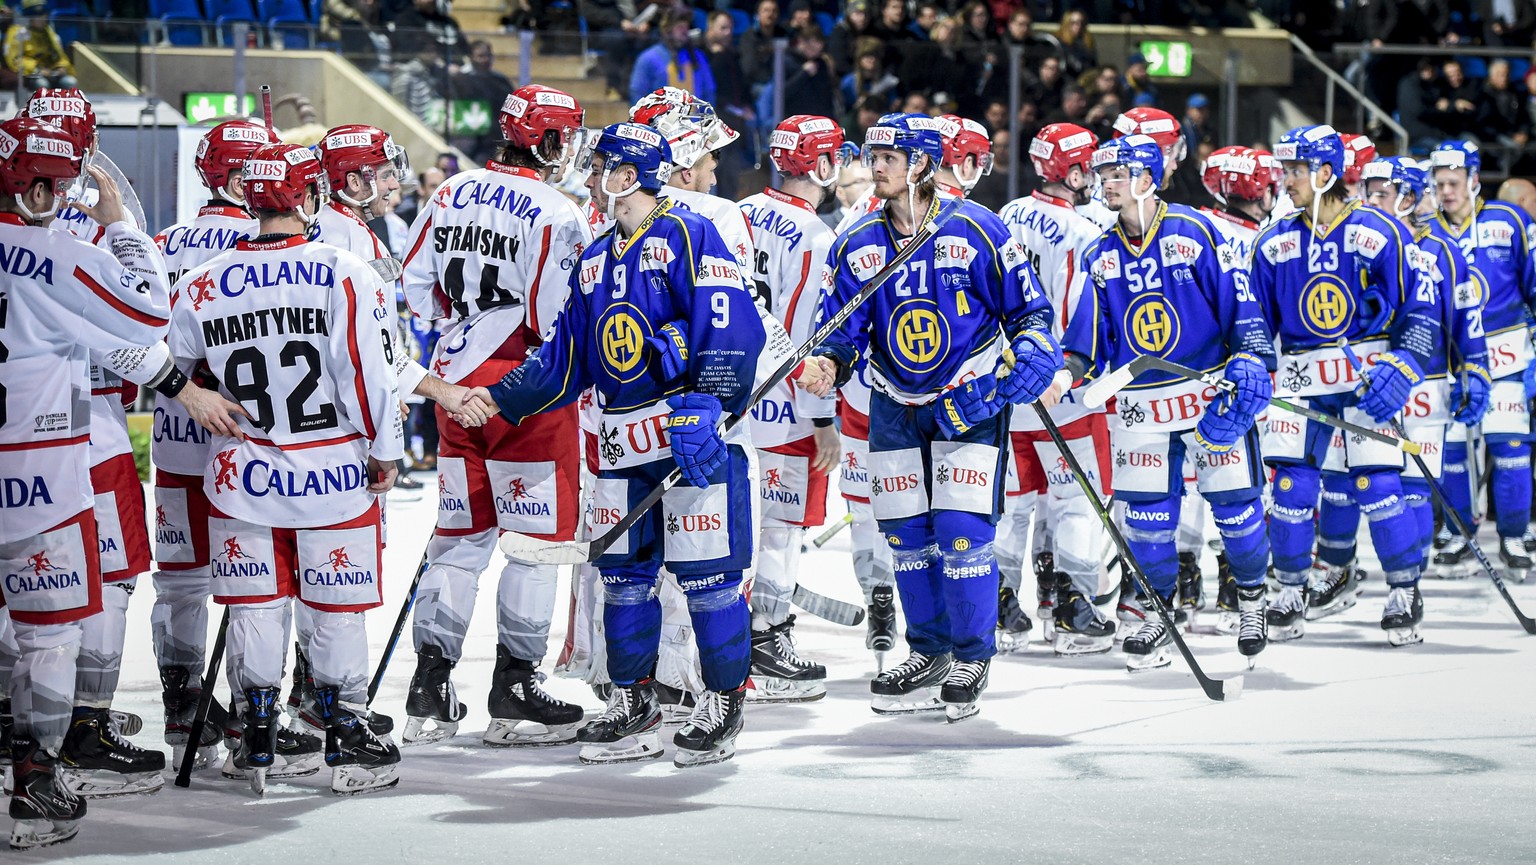 Davos&#039; Magnus Nygren and the team after the game between HC Davos and HC Ocelari Trinec, at the 93th Spengler Cup ice hockey tournament in Davos, Switzerland, Friday, December 27, 2019. (KEYSTONE ...